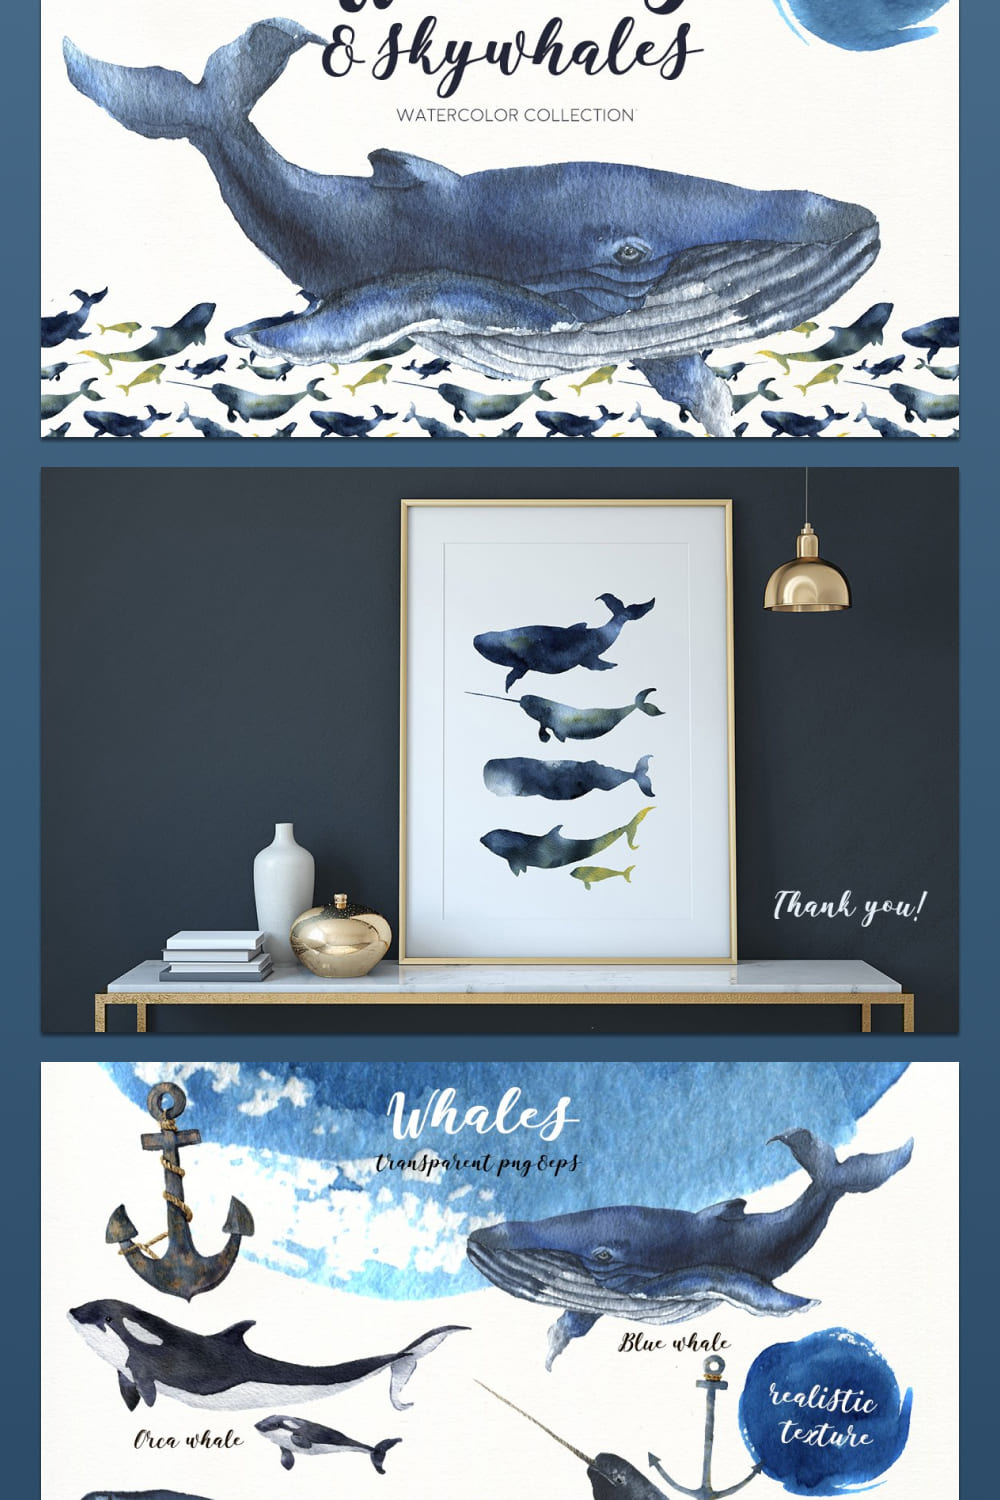 whales. watercolor underwater graphics collection.